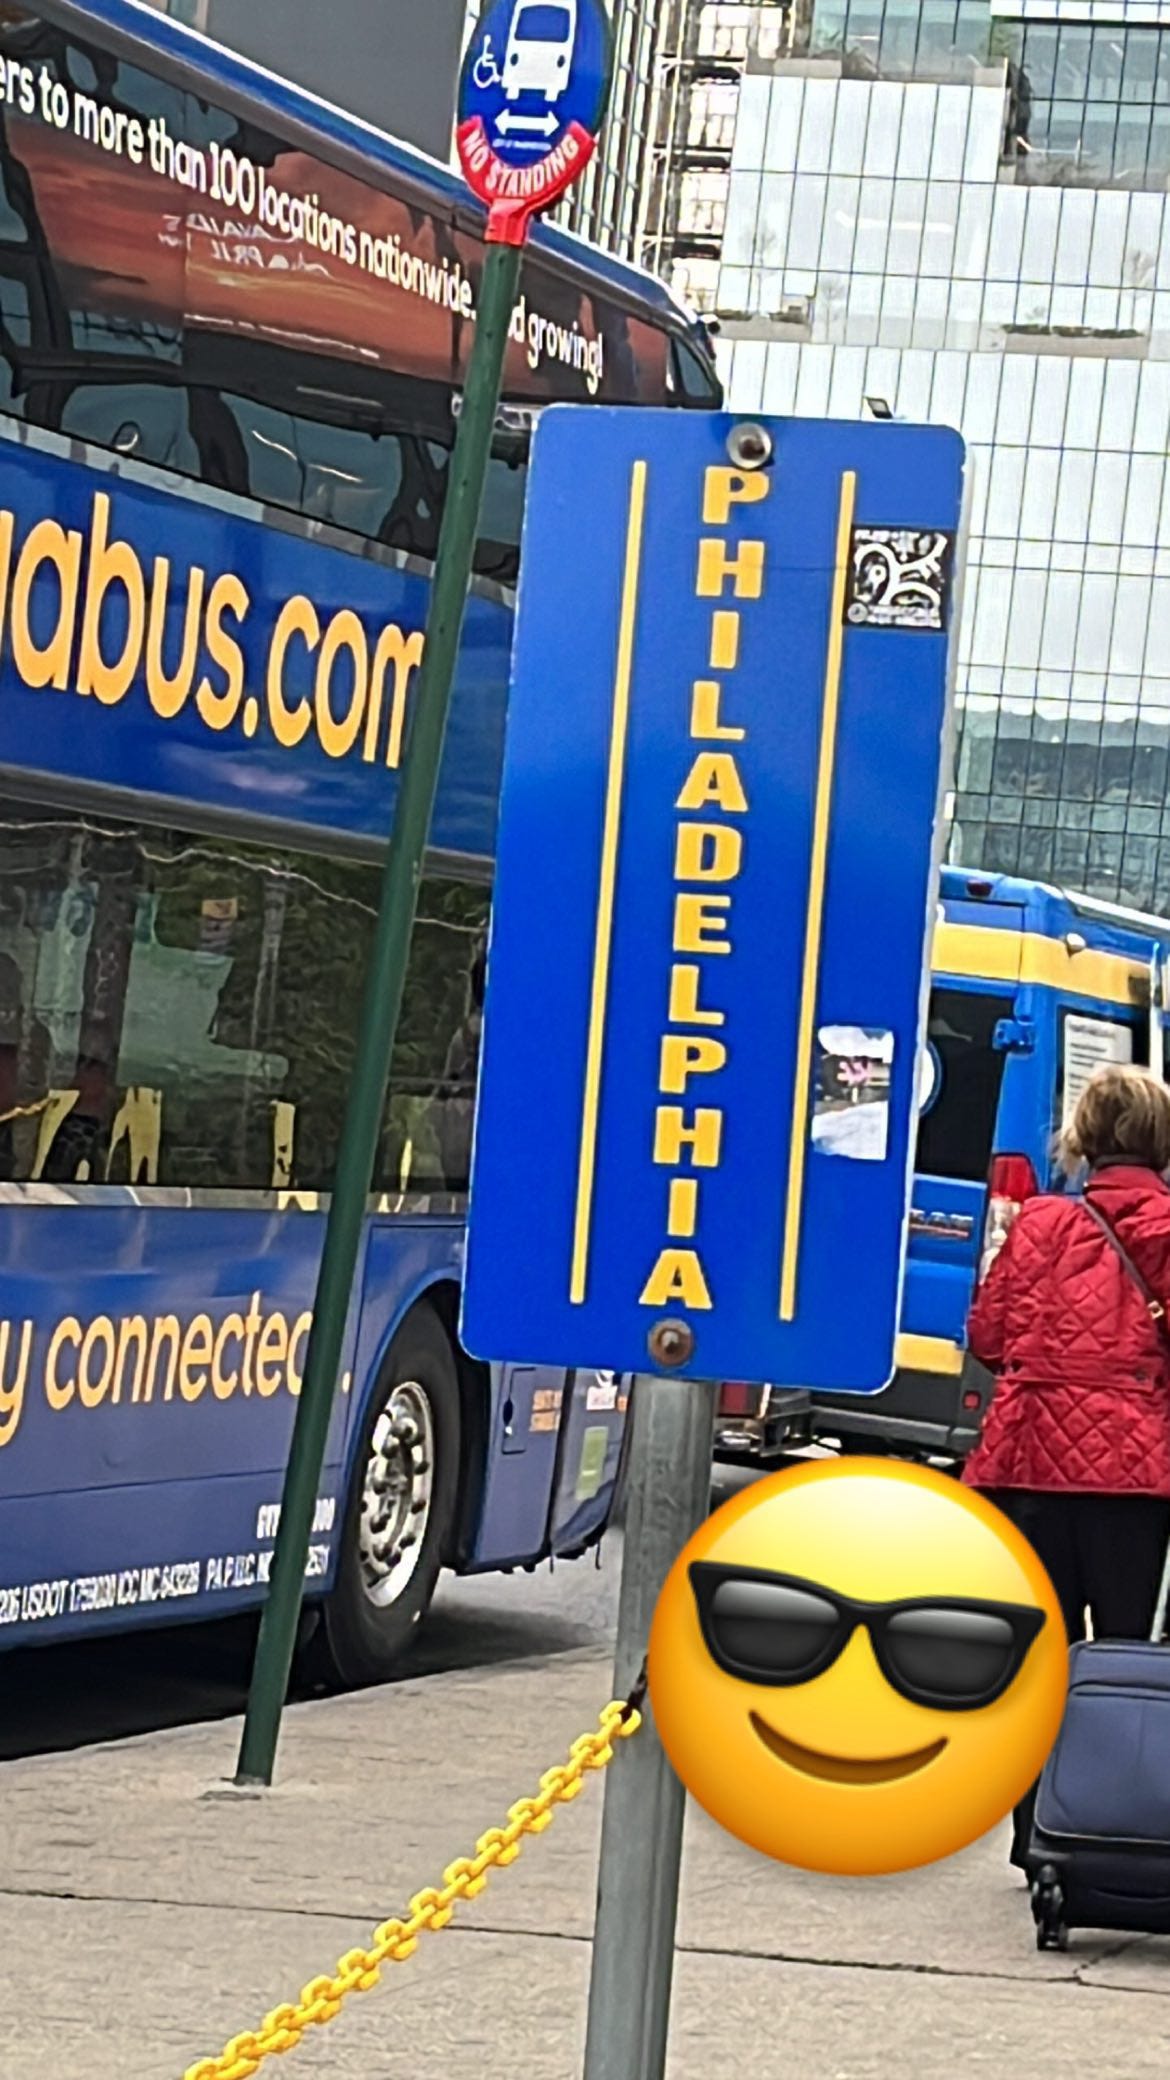 A blue sign that says "Philadelphia" in yellow text. A blue double decker bus is in the background.